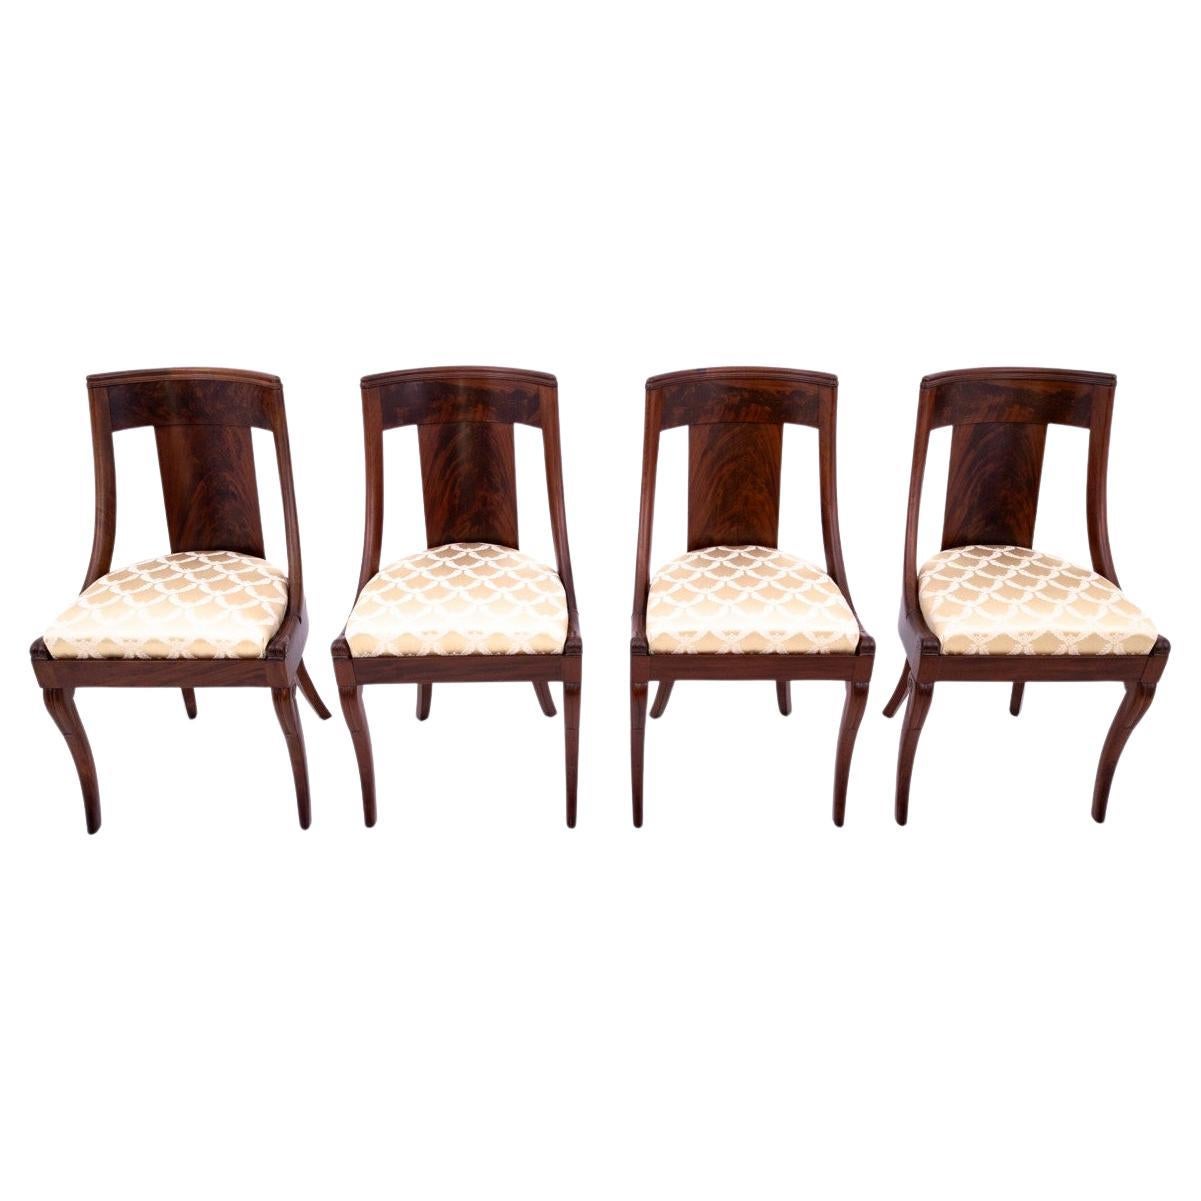 An antique set of chairs from around 1860.